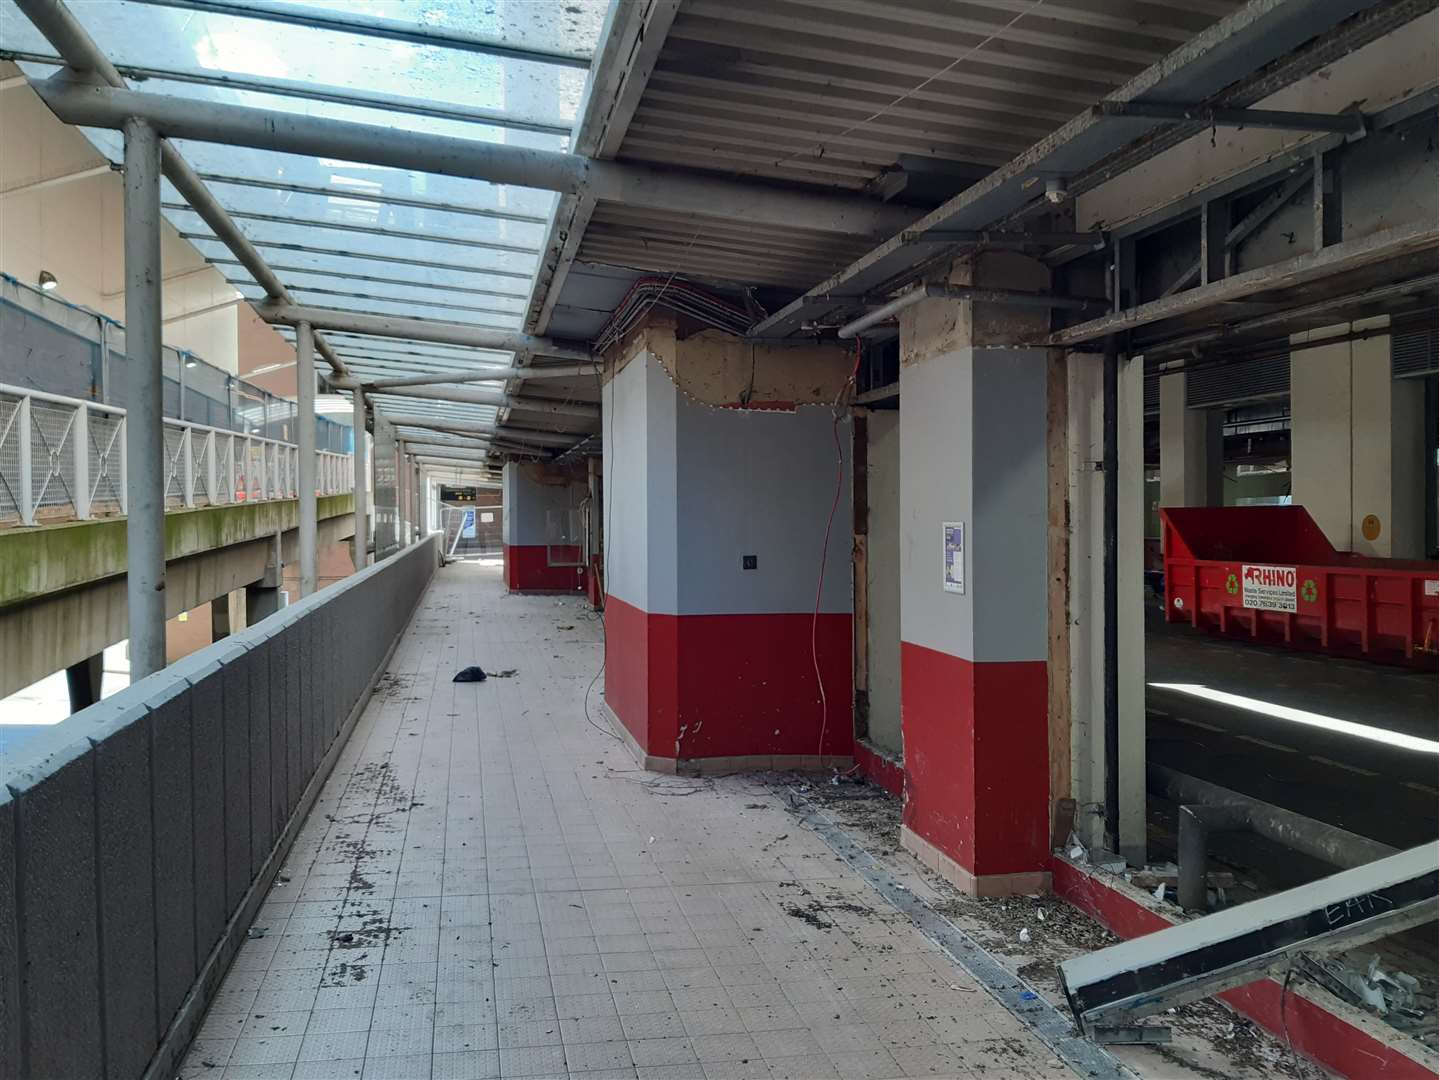 Work is on-going to revamp Maidstone's bus station. Picture: MBC